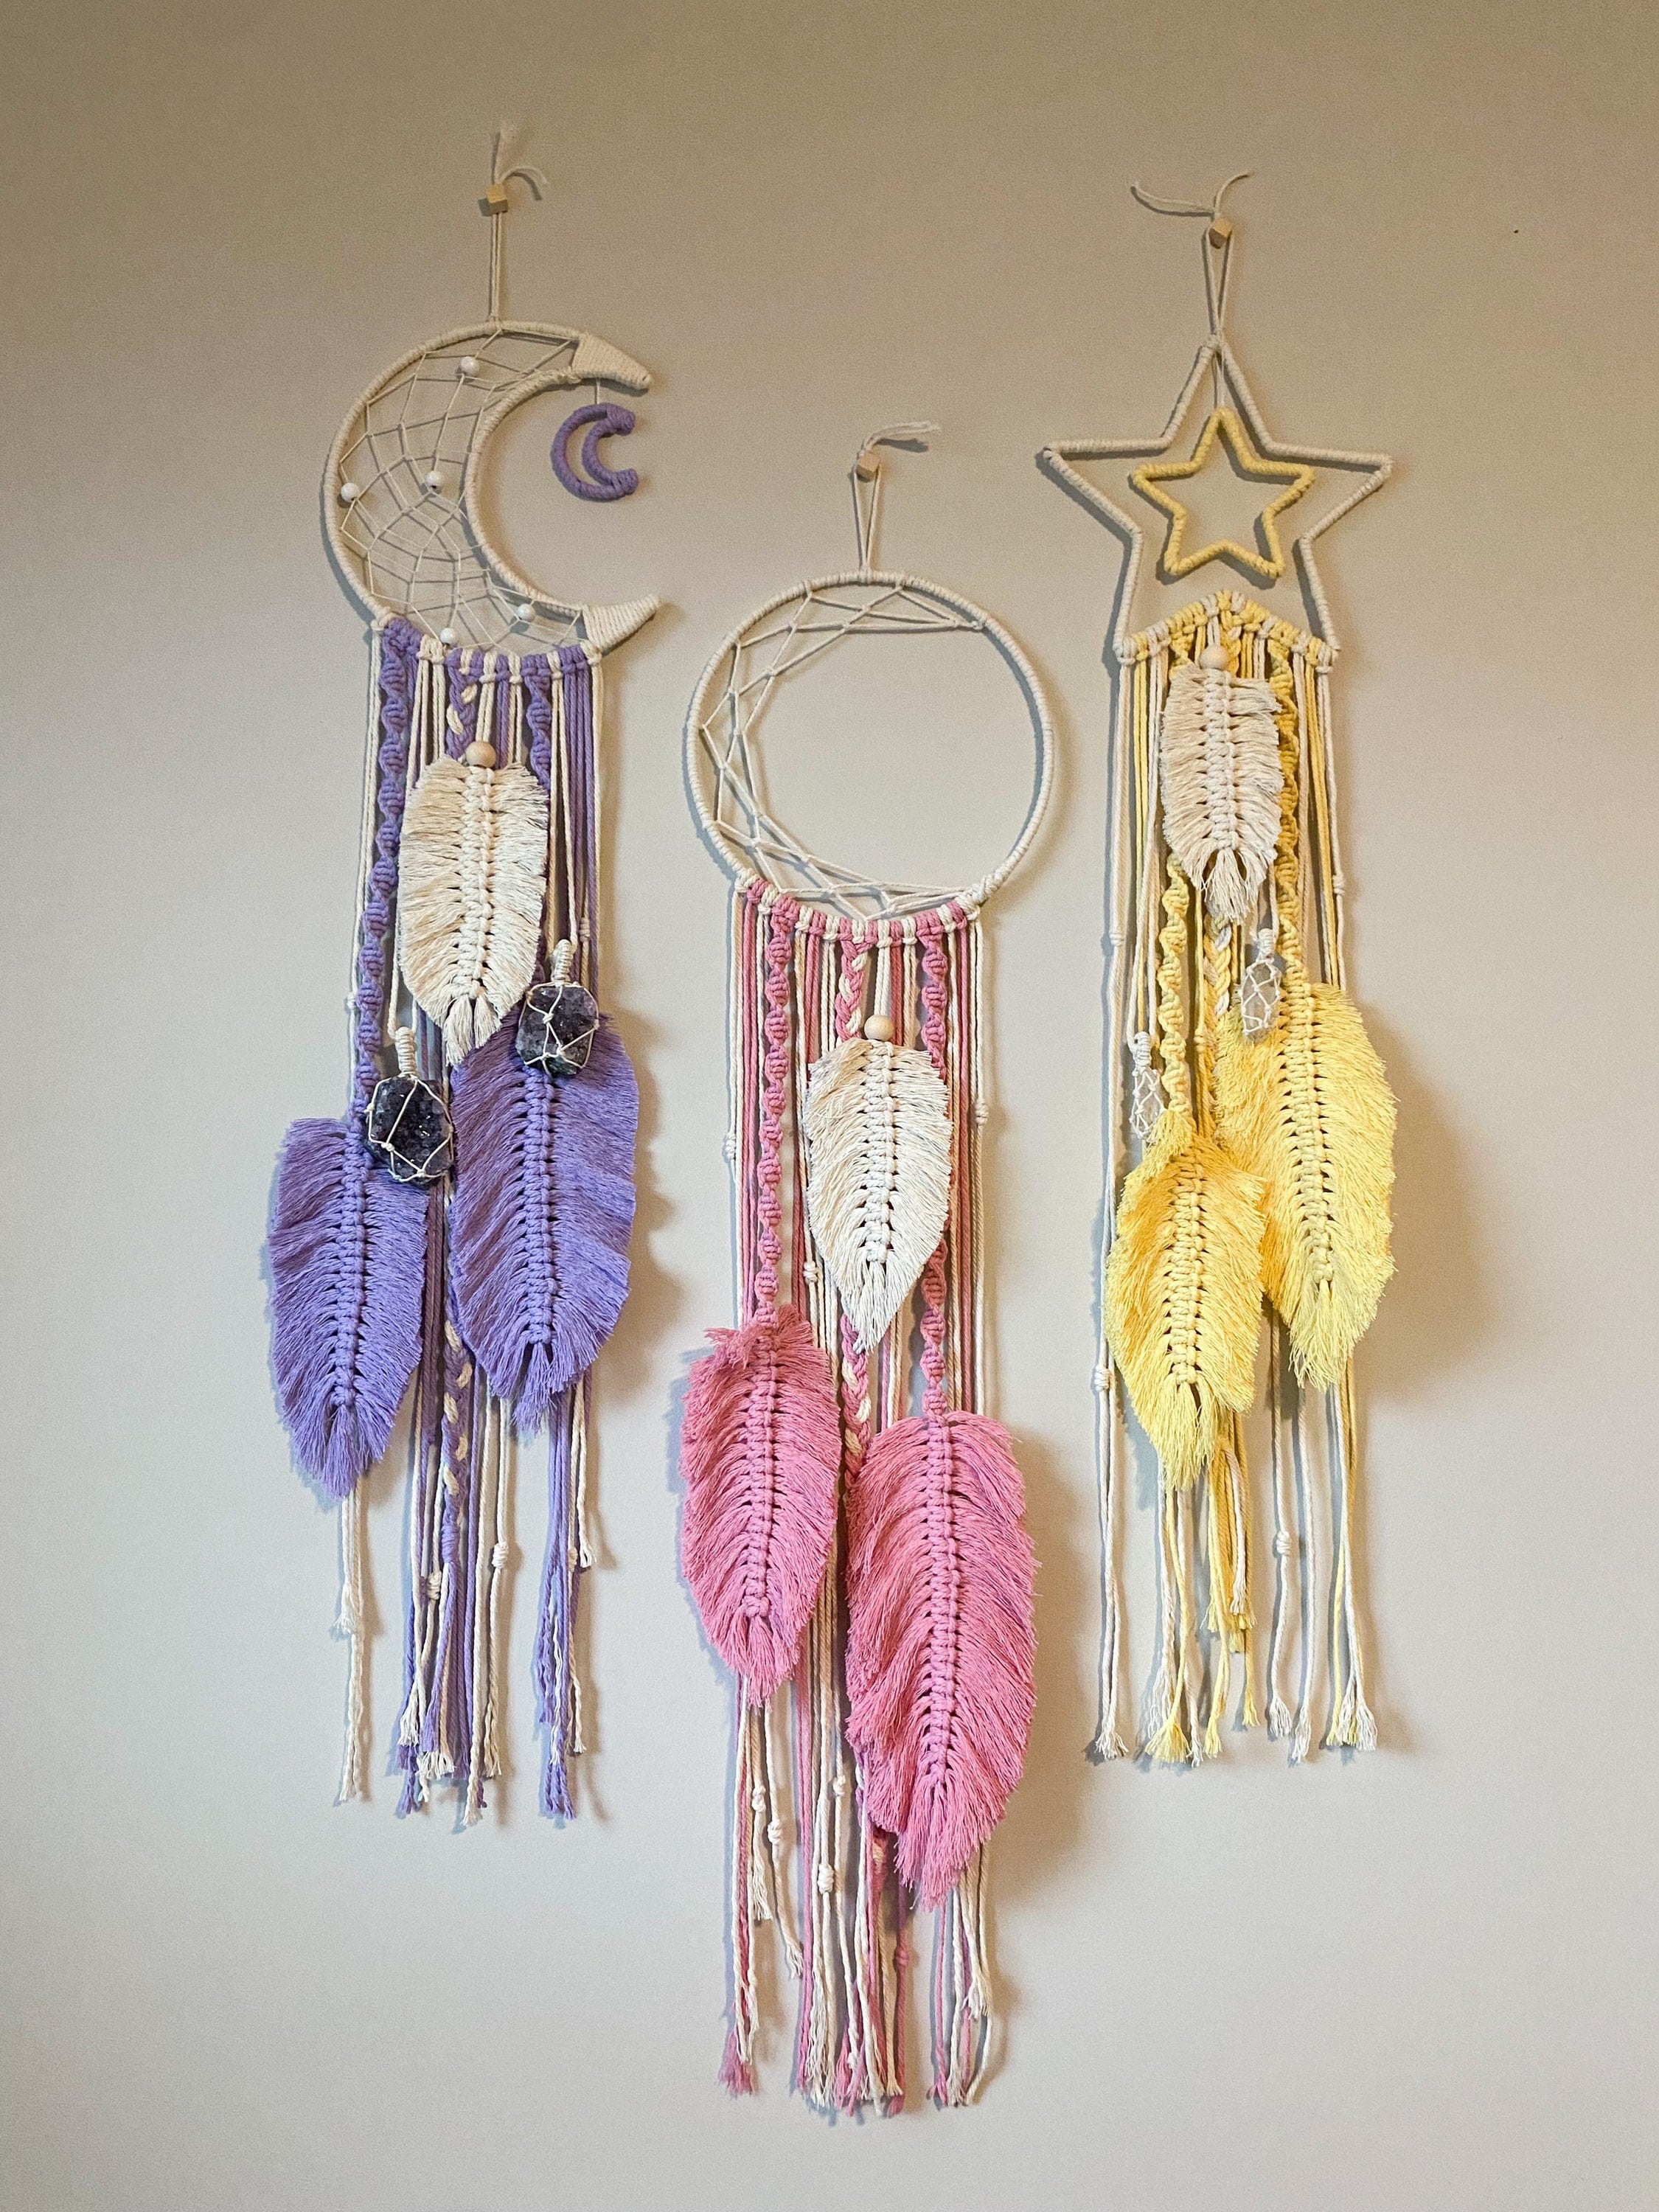 Dream Catcher Kit for Adults, Teens and Tweens to Make Your Own